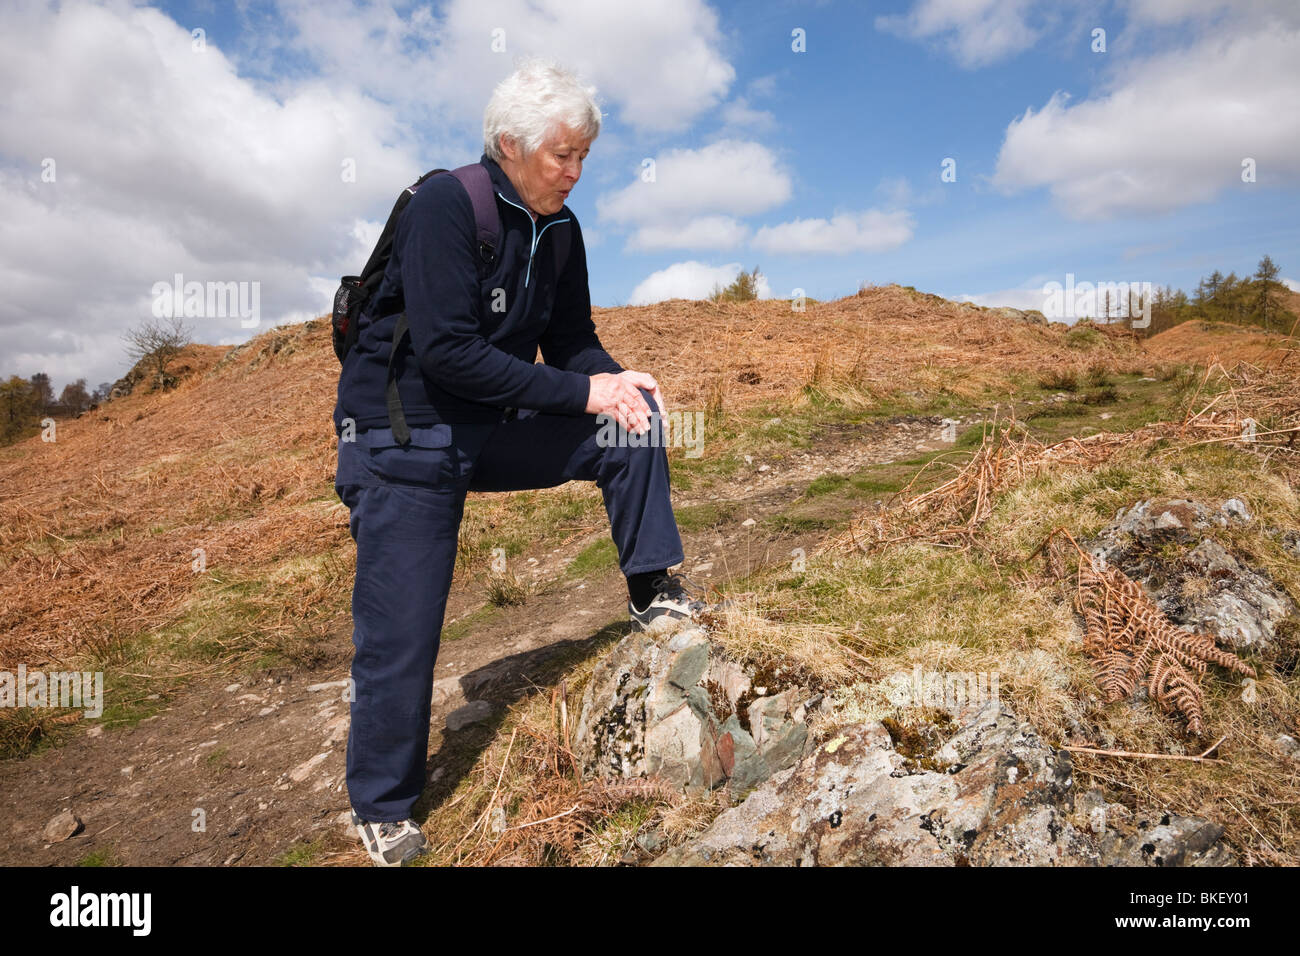 Senior elderly woman walker rubbing a very sore knee arthritic after walking exercise outdoors. Cumbria, England, UK, Britain. Stock Photo